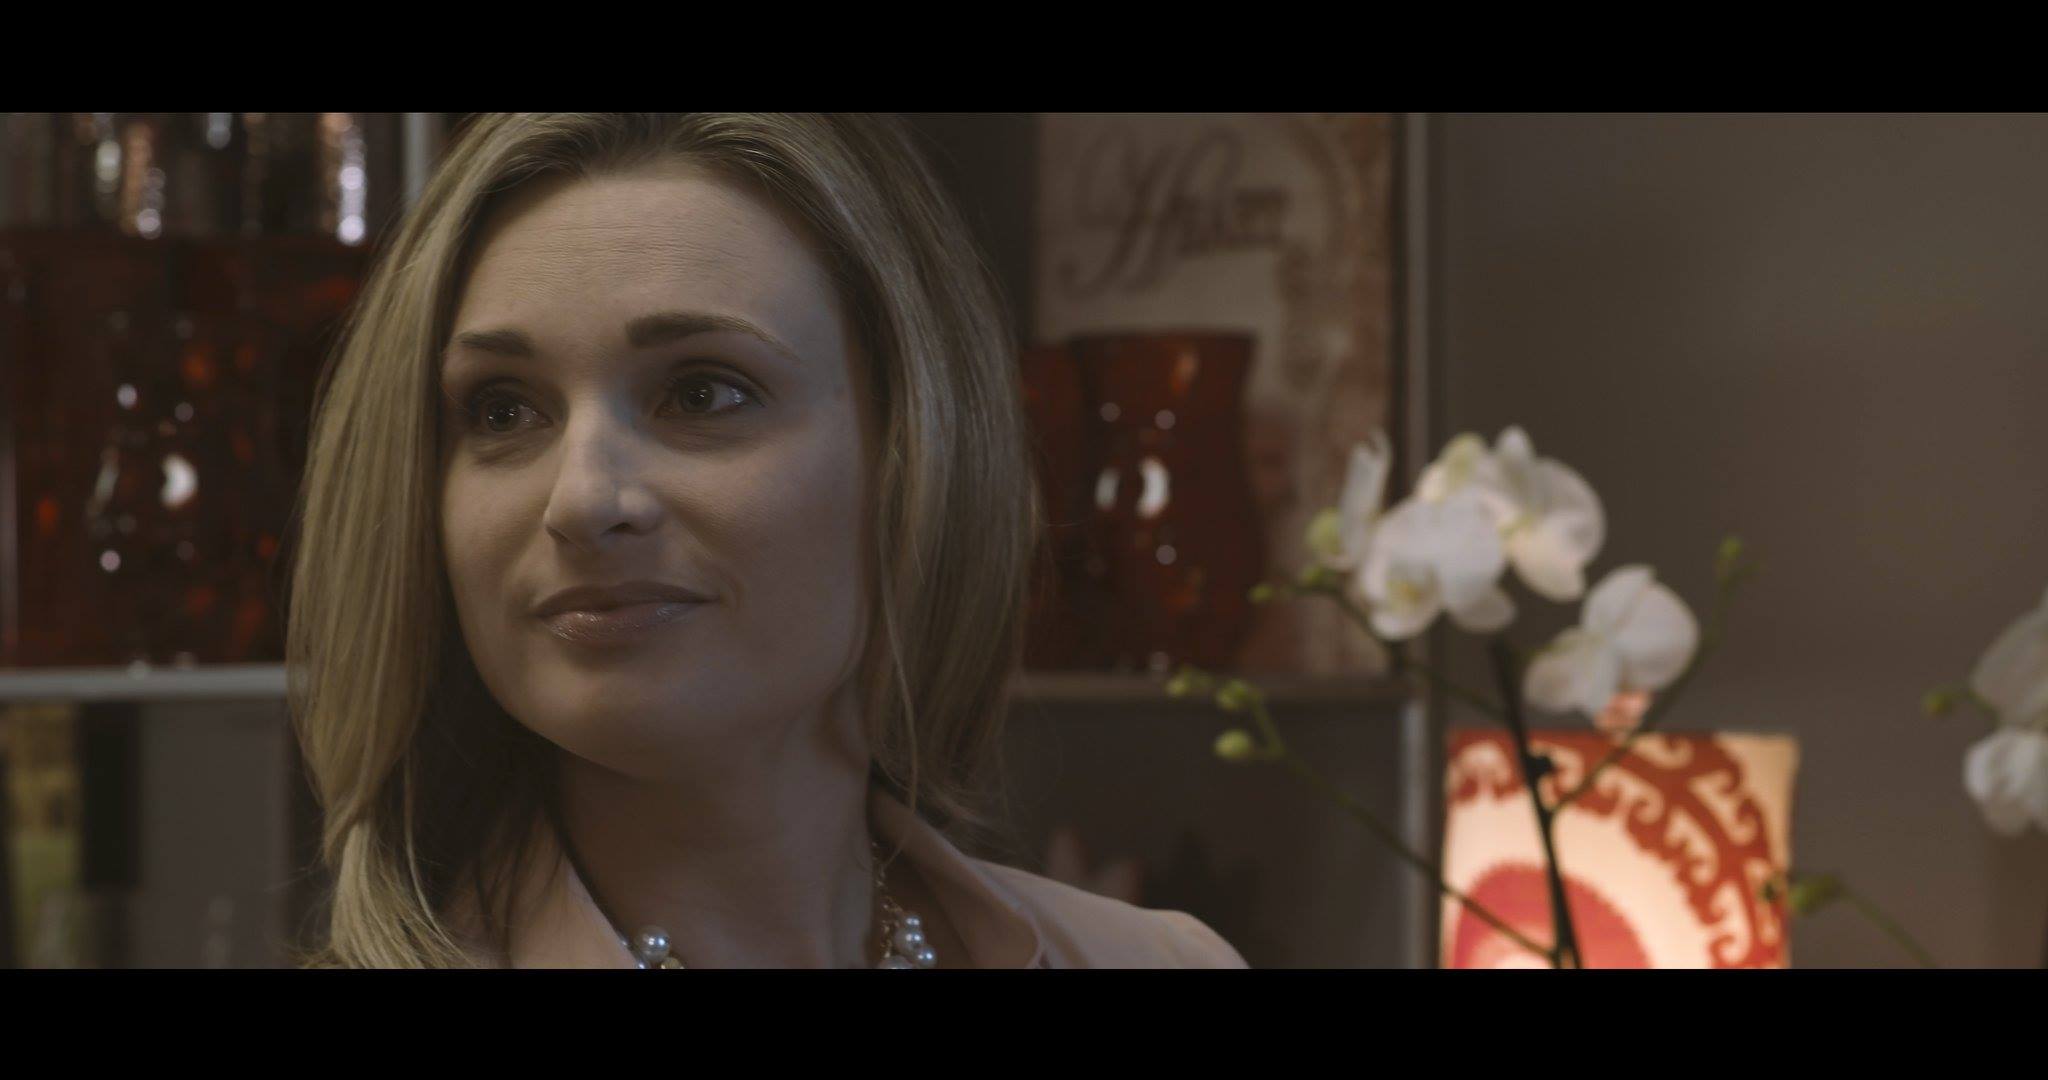 Still shot from short film Wounded Hearts